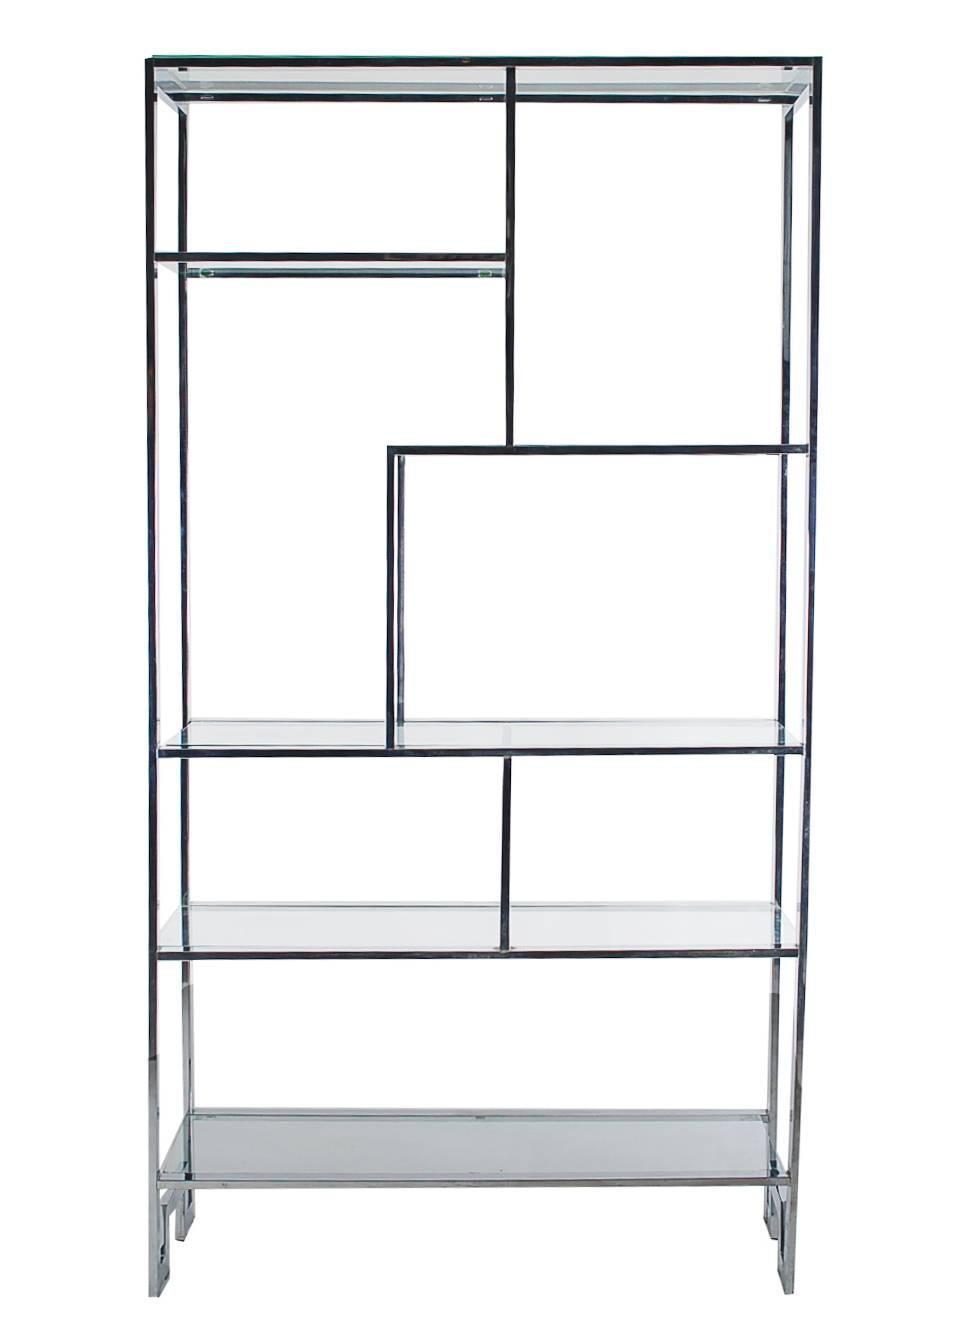 A large asymmetrical chrome and glass etagere in the style of Milo Baughman. It features a heavy chrome flat bar frame with various sized glass shelves. Very clean and ready for immediate use.